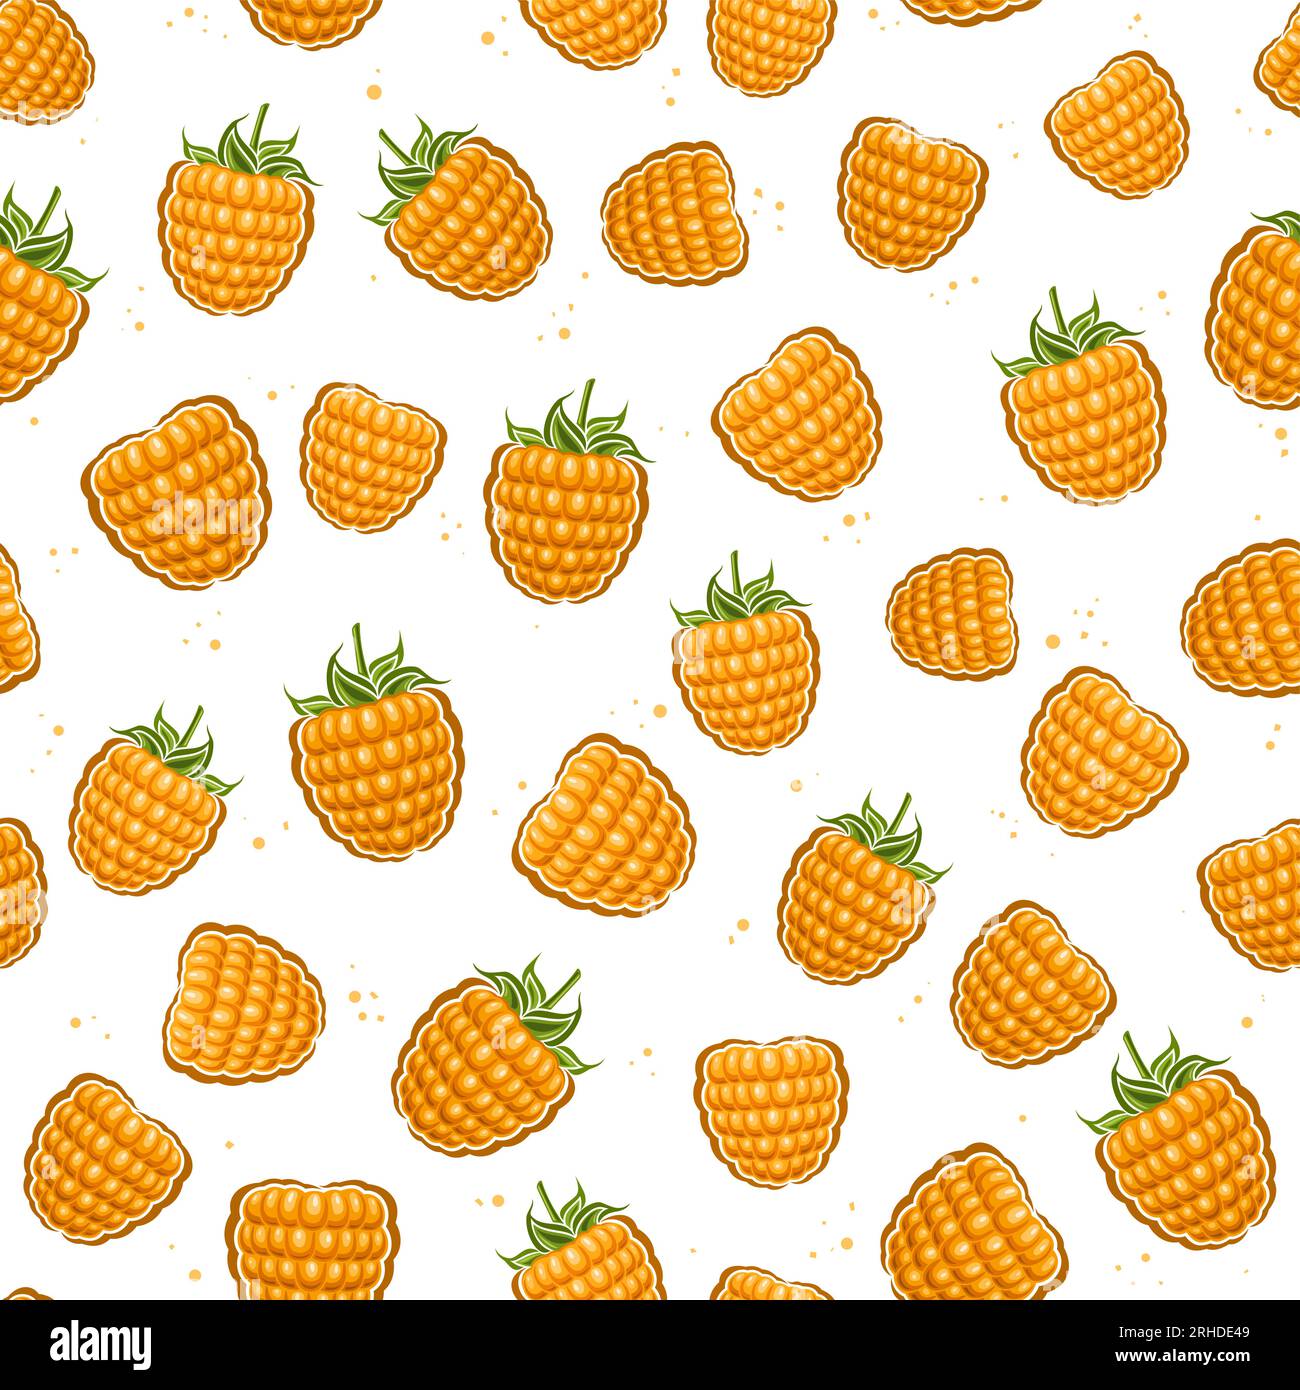 Vector Yellow Raspberry seamless pattern, repeating background with cut out illustration of ripe whole raspberries with green leaves for wrapping pape Stock Vector